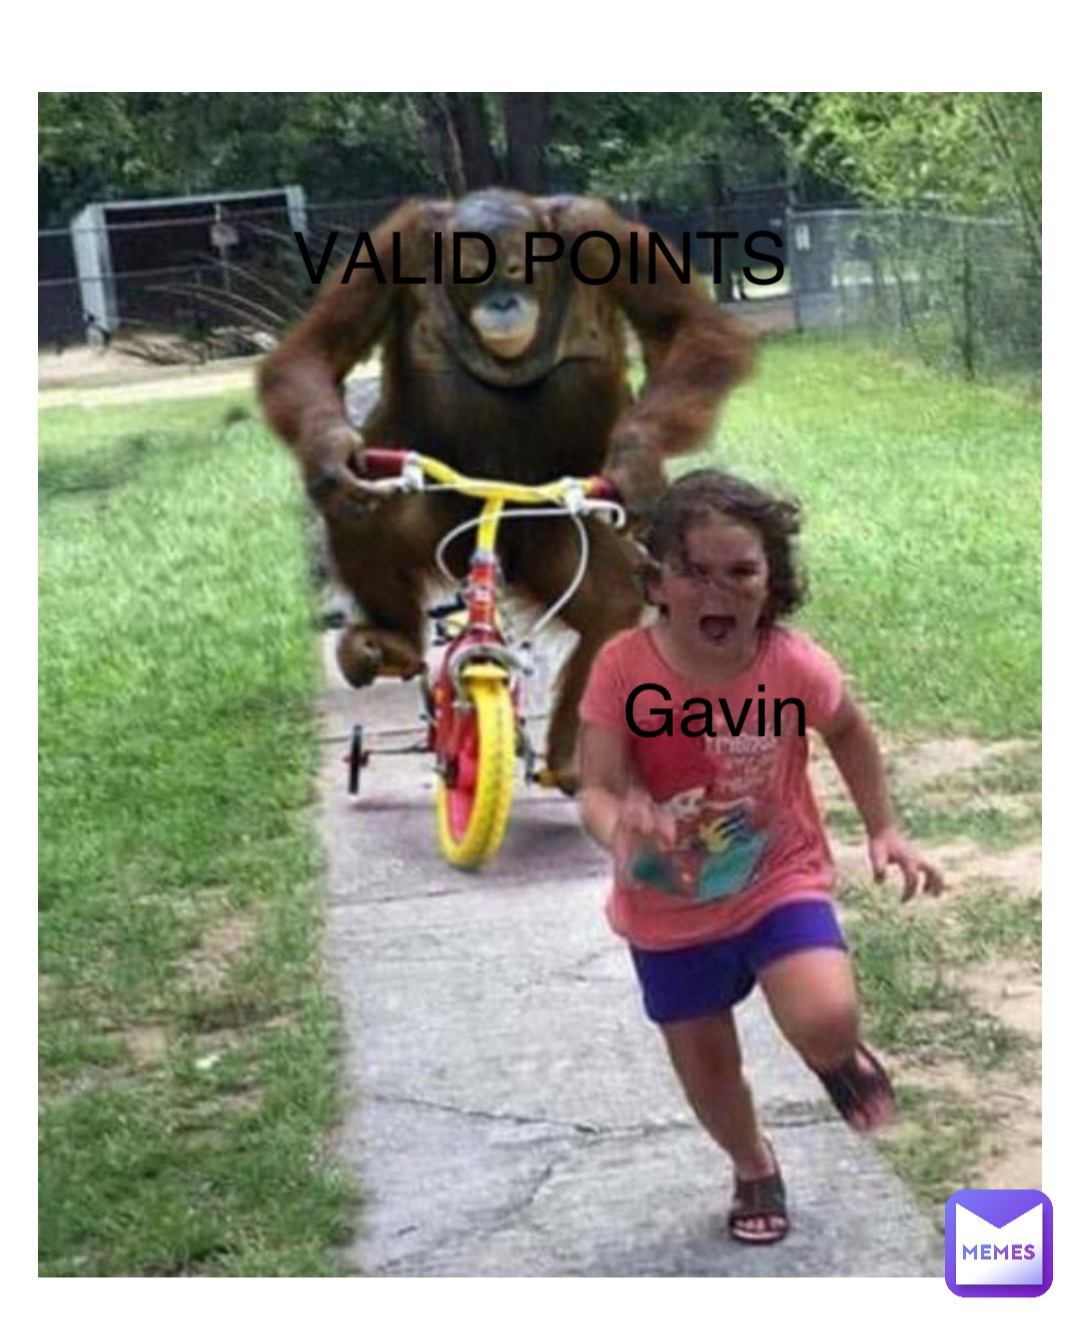 Double tap to edit VALID POINTS Gavin